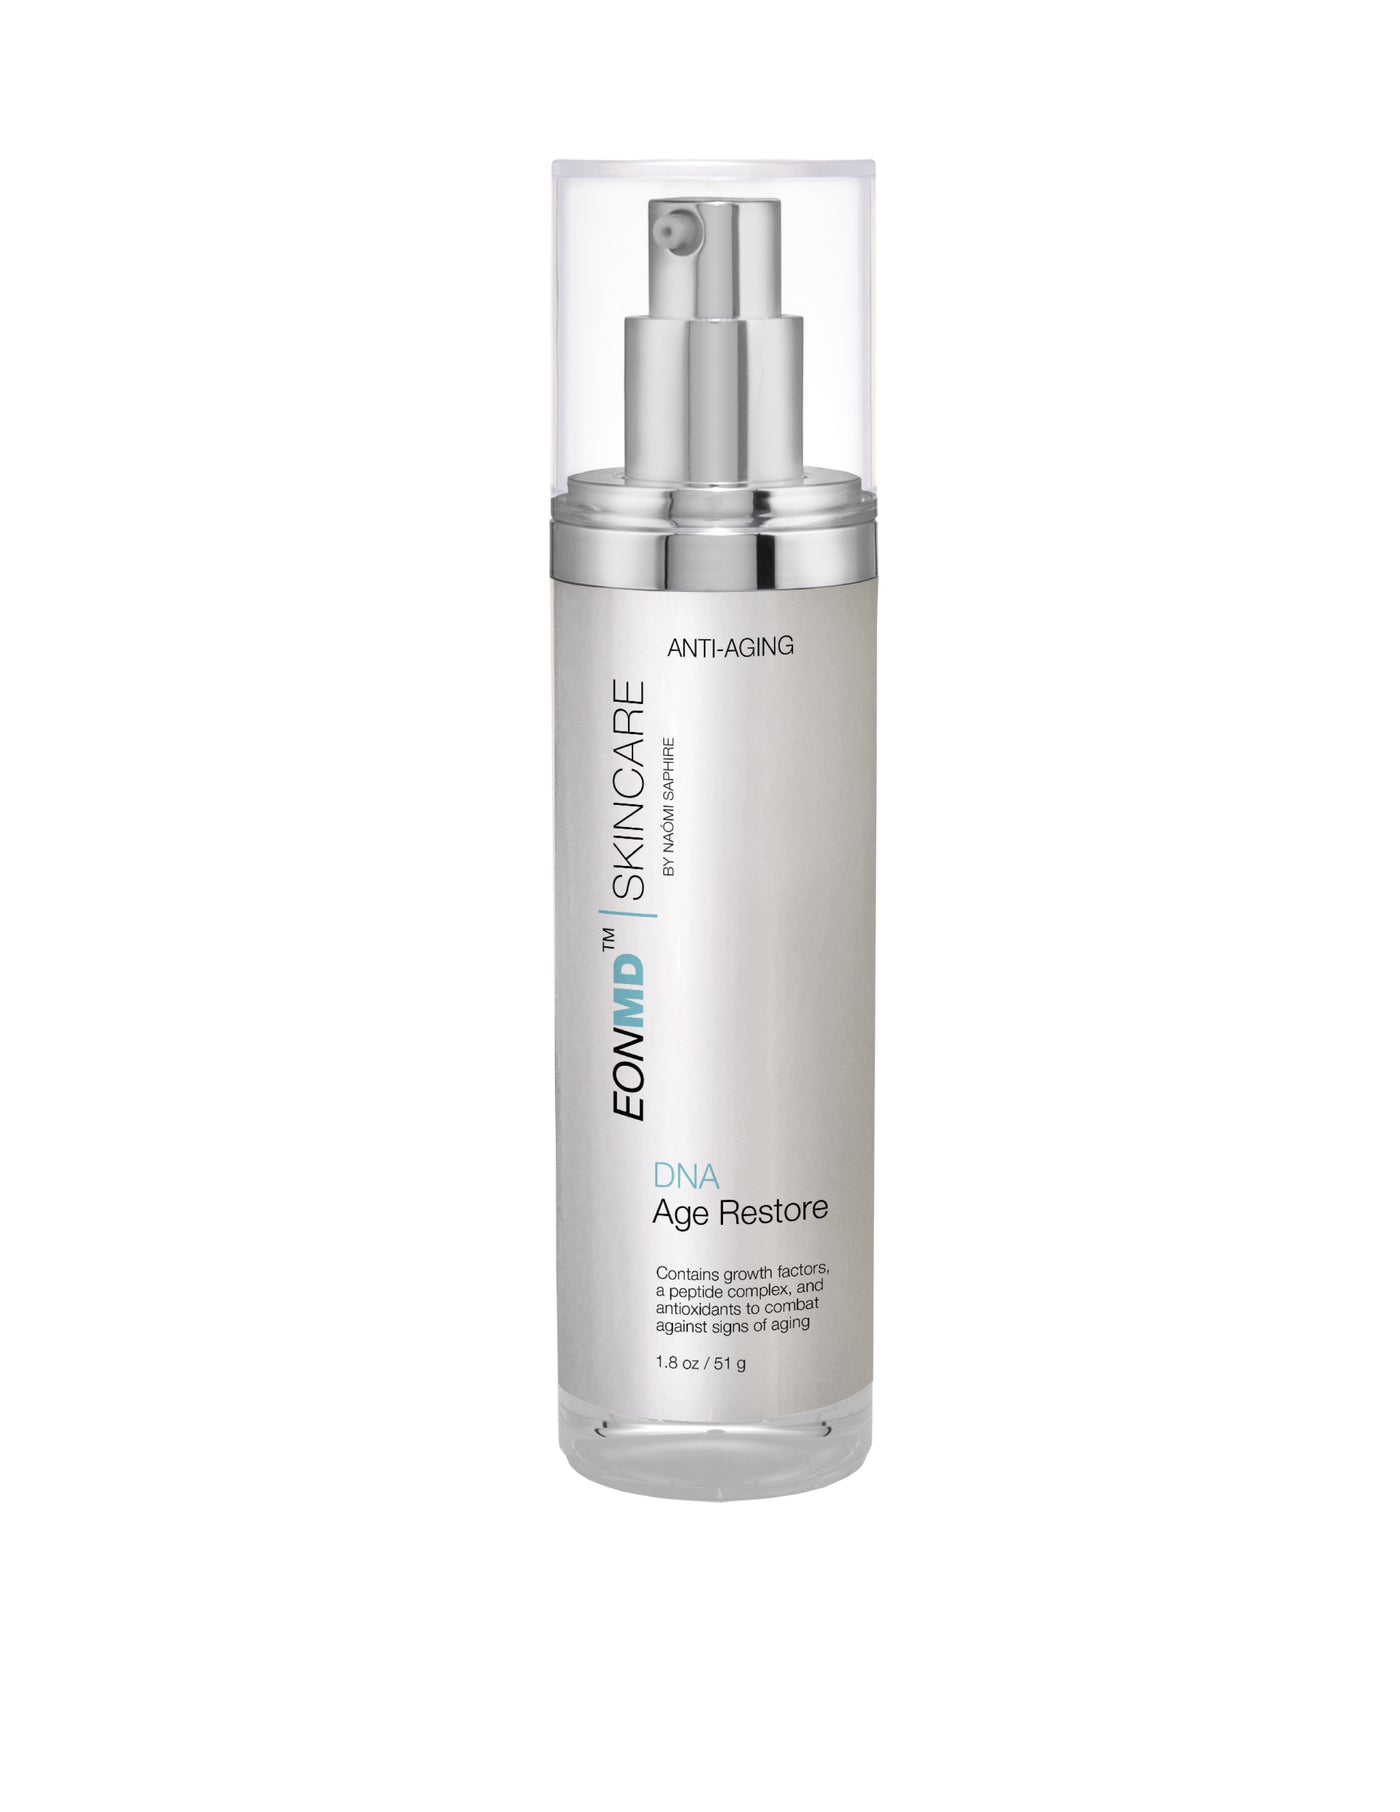 This unique and creative formulation, containing human growth factors, a peptide complex, antioxidants, and other skin-restorative ingredients, combats against signs of aging, enhances the production of collagen and elastin and rejuvenates the skin. Other elements also replenish the skin's fatty acids needed to hydrate the skin, leaving it soft, smooth, and restoring its youthful appearance.